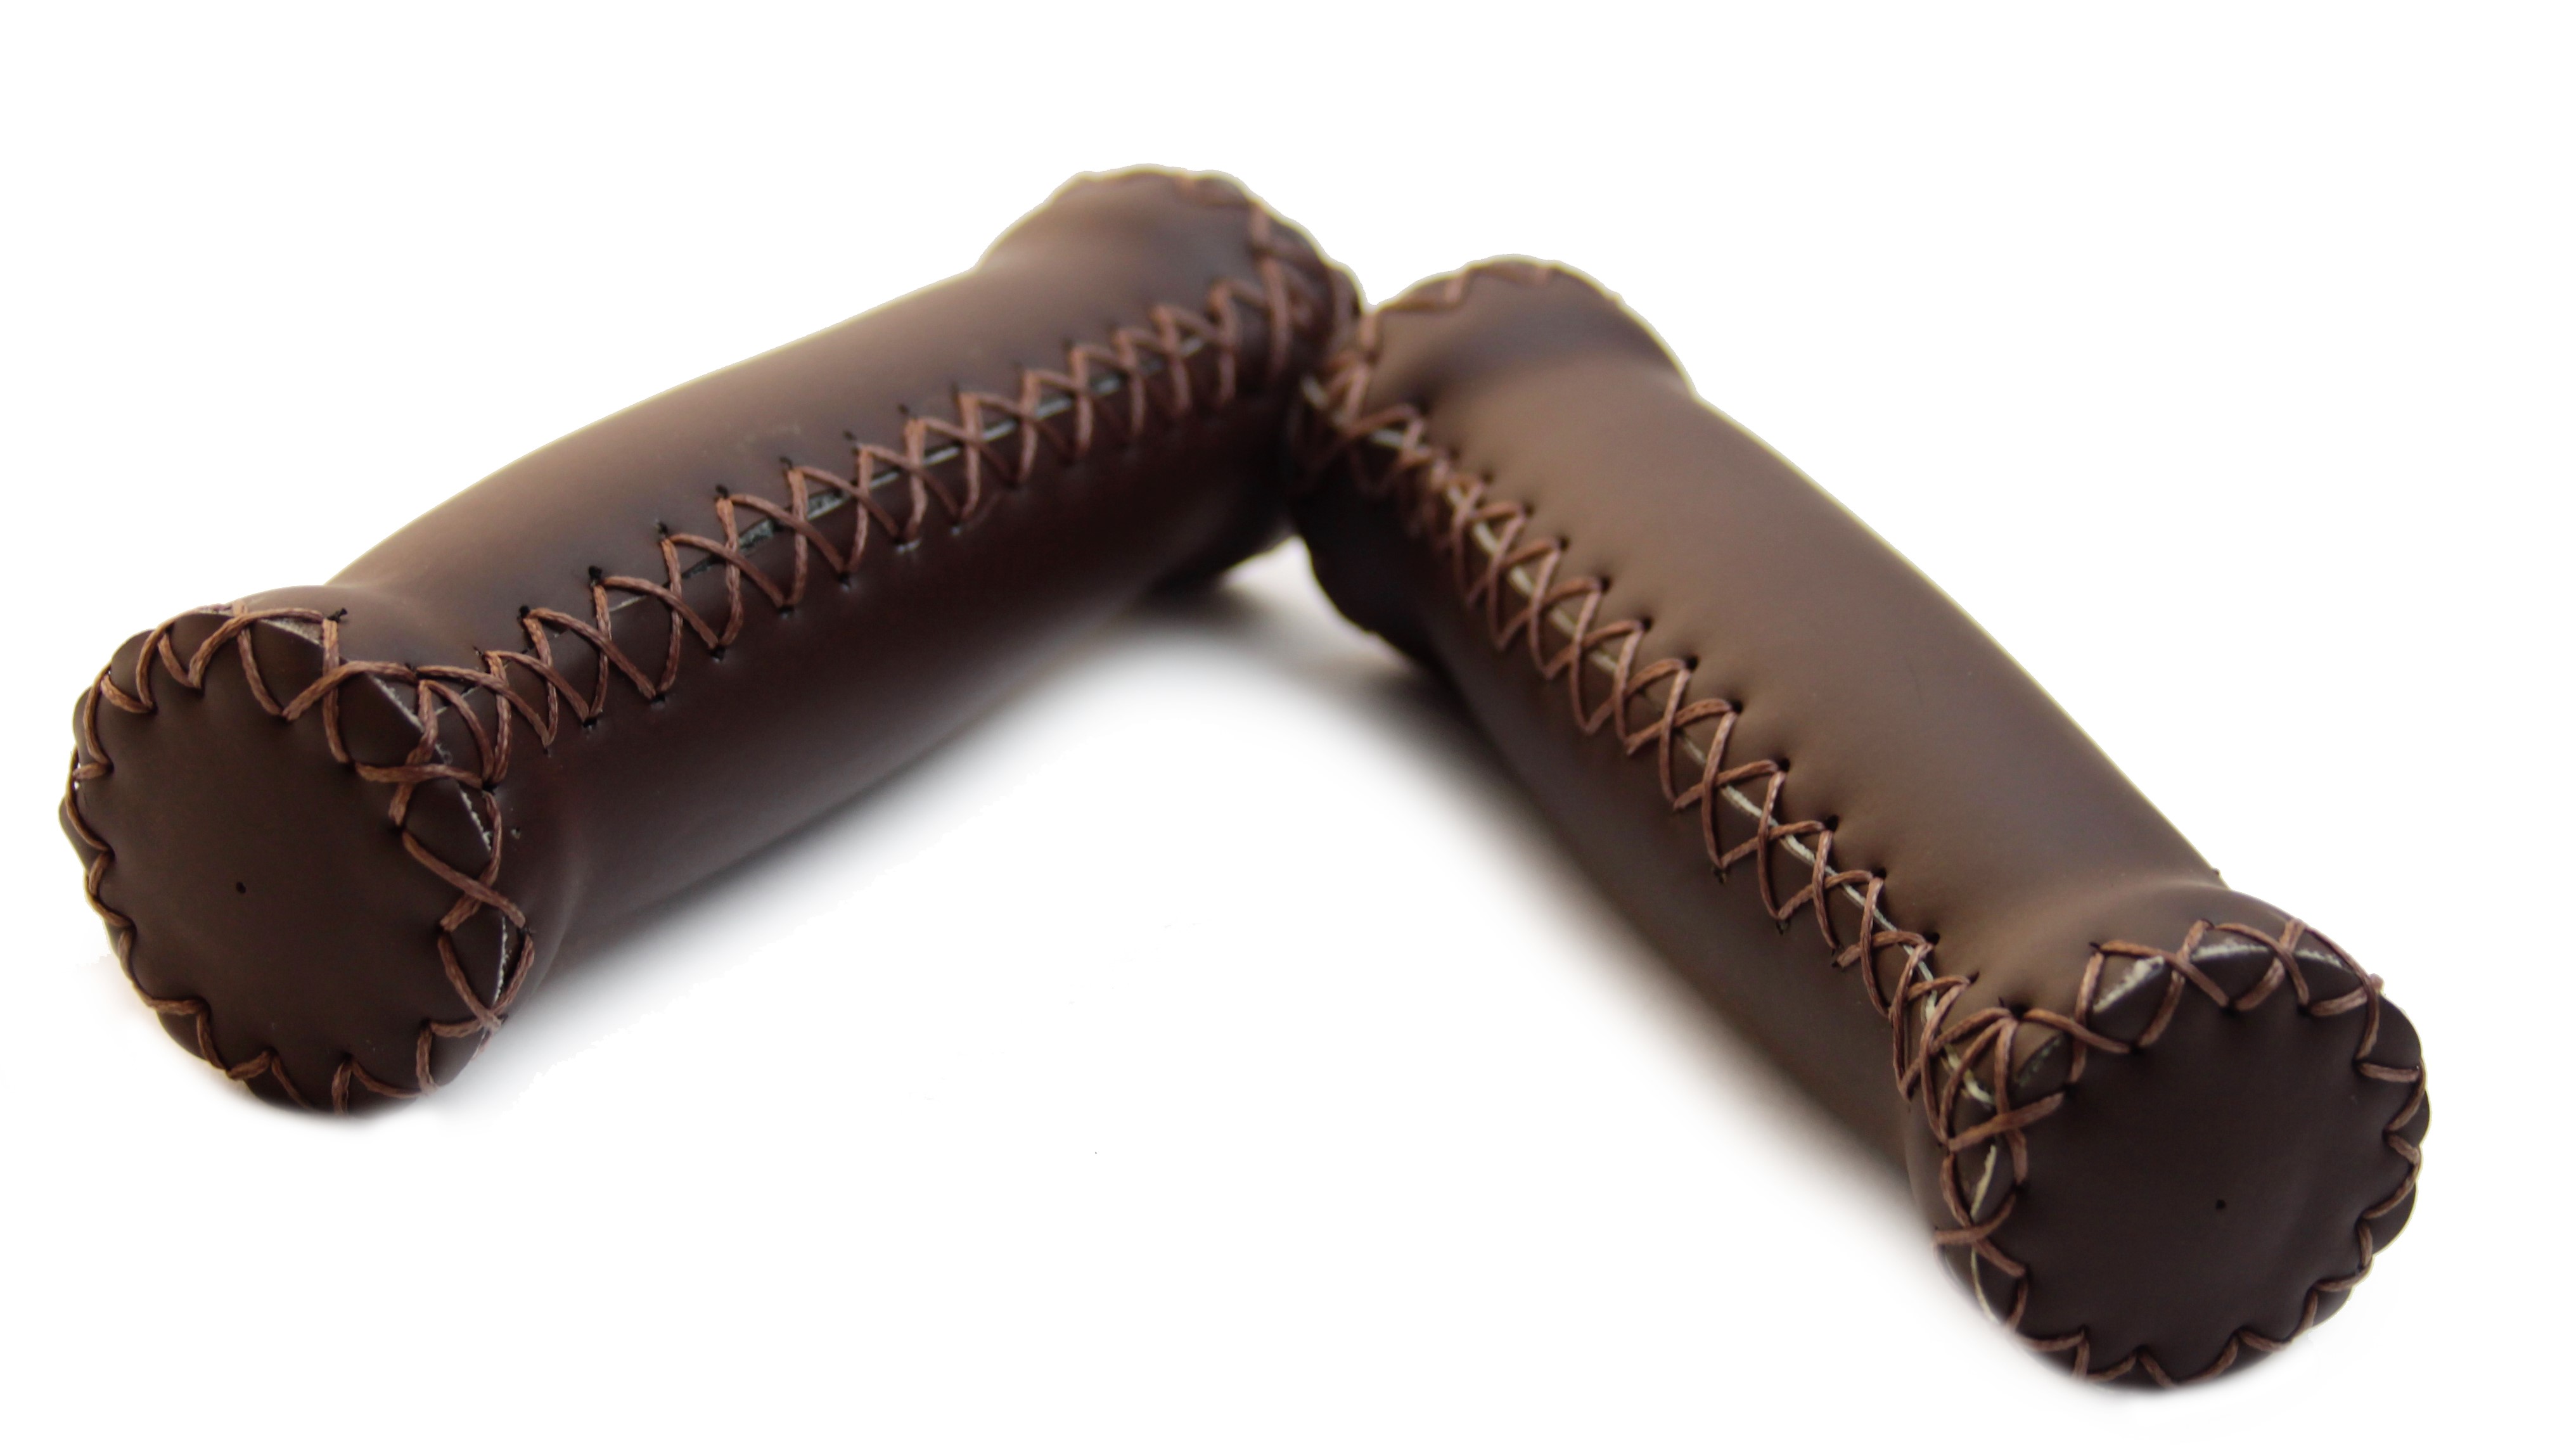 Italian Grips with outer seams, dark brown